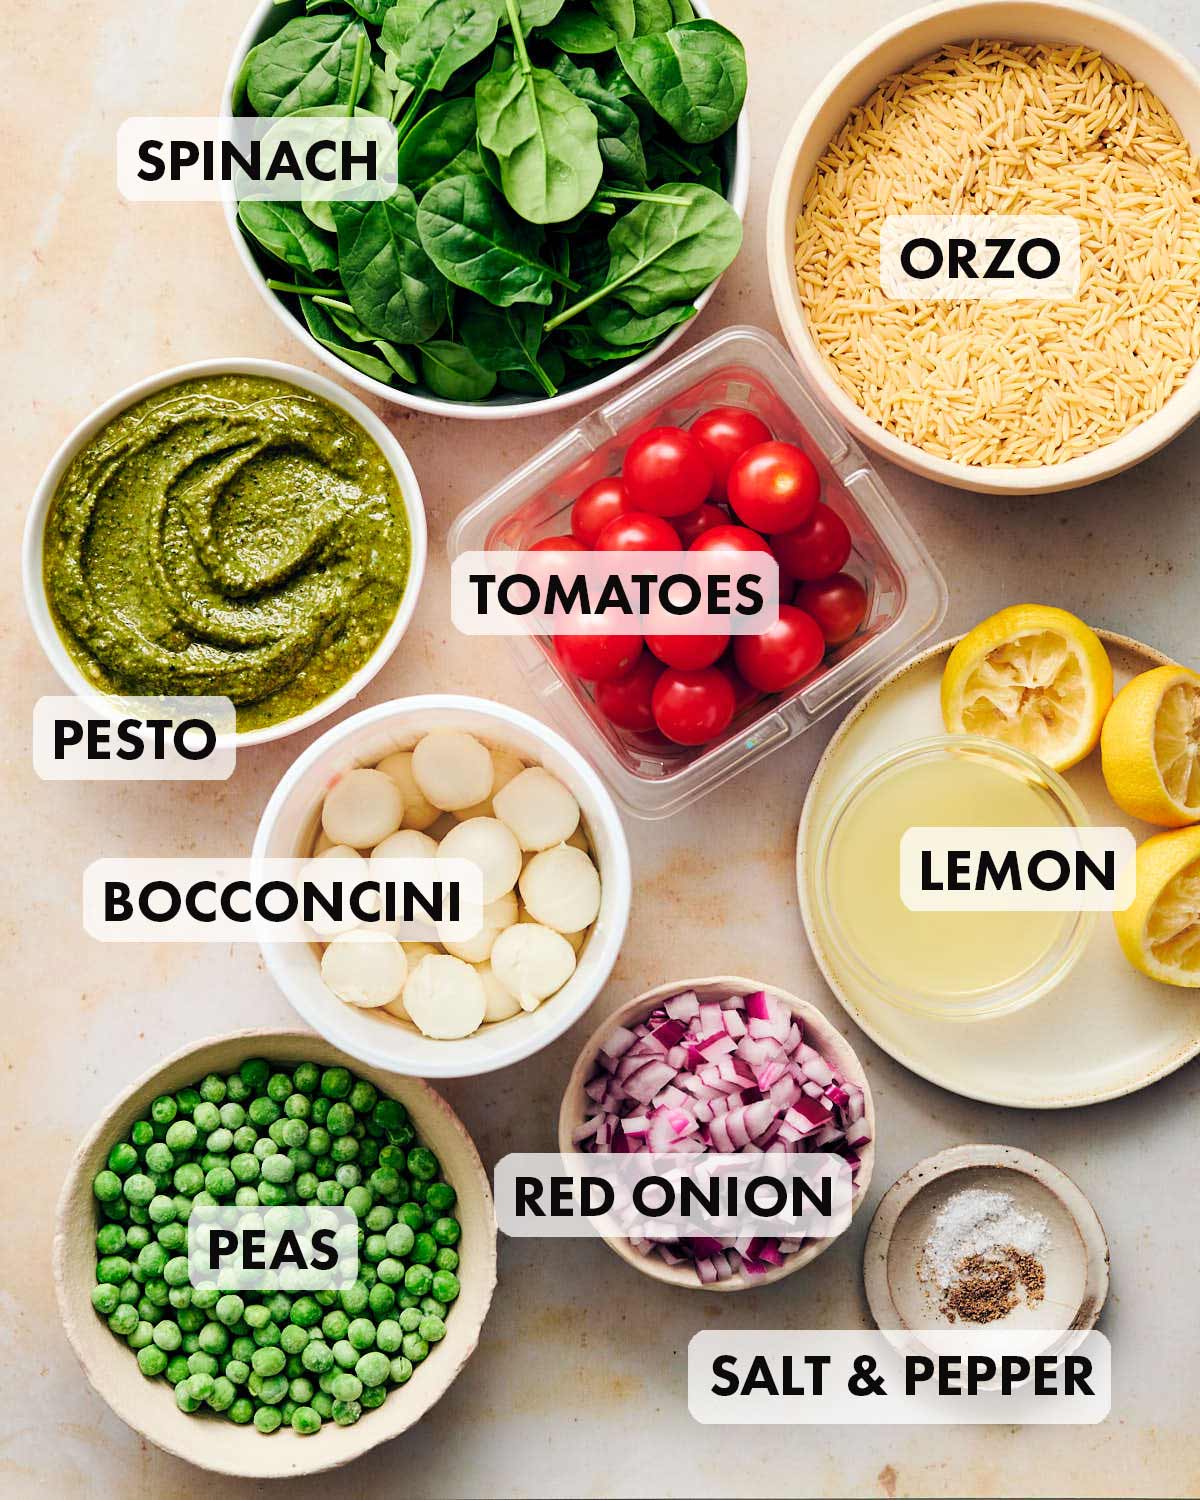 Ingredients to make Orzo Pesto Salad including red onion, lemon, spinach, and tomatoes.